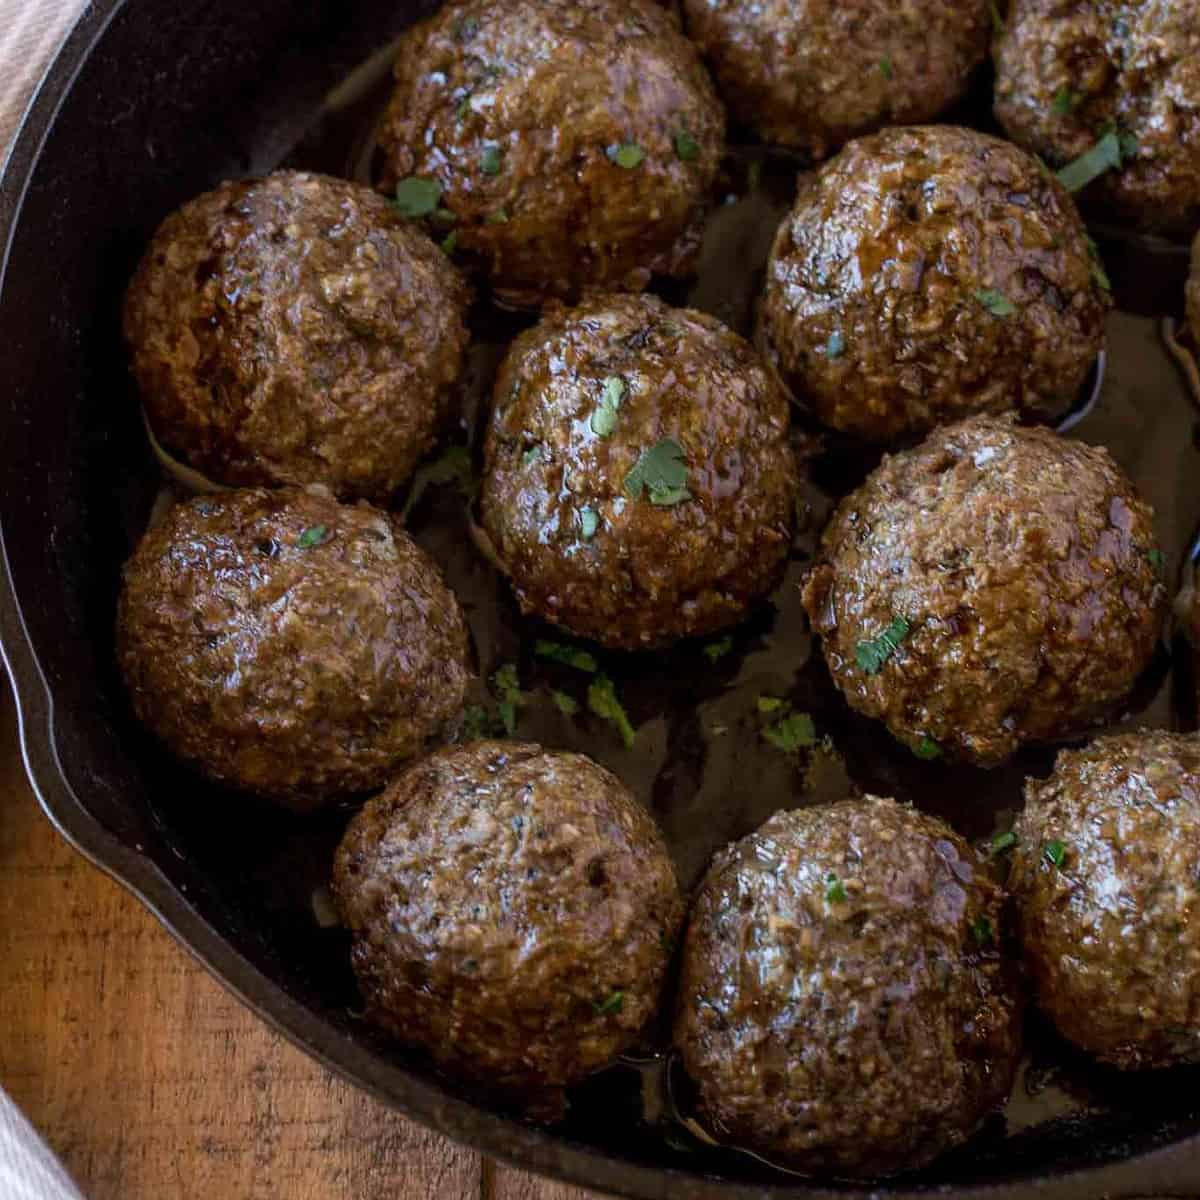  These Köfte (meatballs) have a twist: Here's how to make them meat-free!